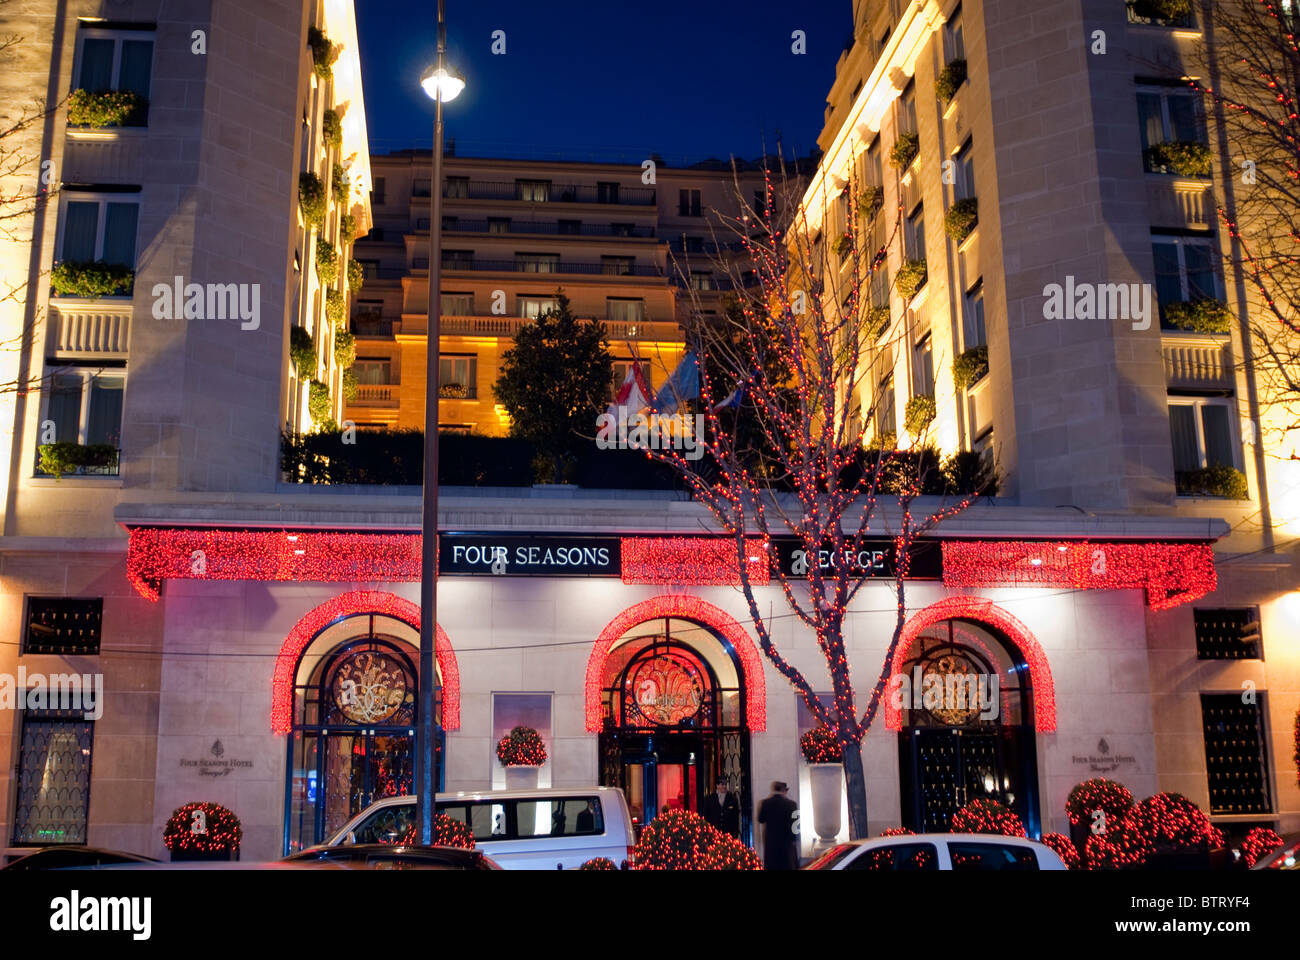 Paris, France, Luxury Hotel "George V", "FOur Seasons", Exterior, Front  Building with Christmas Lighting at Night, chic building france Stock Photo  - Alamy